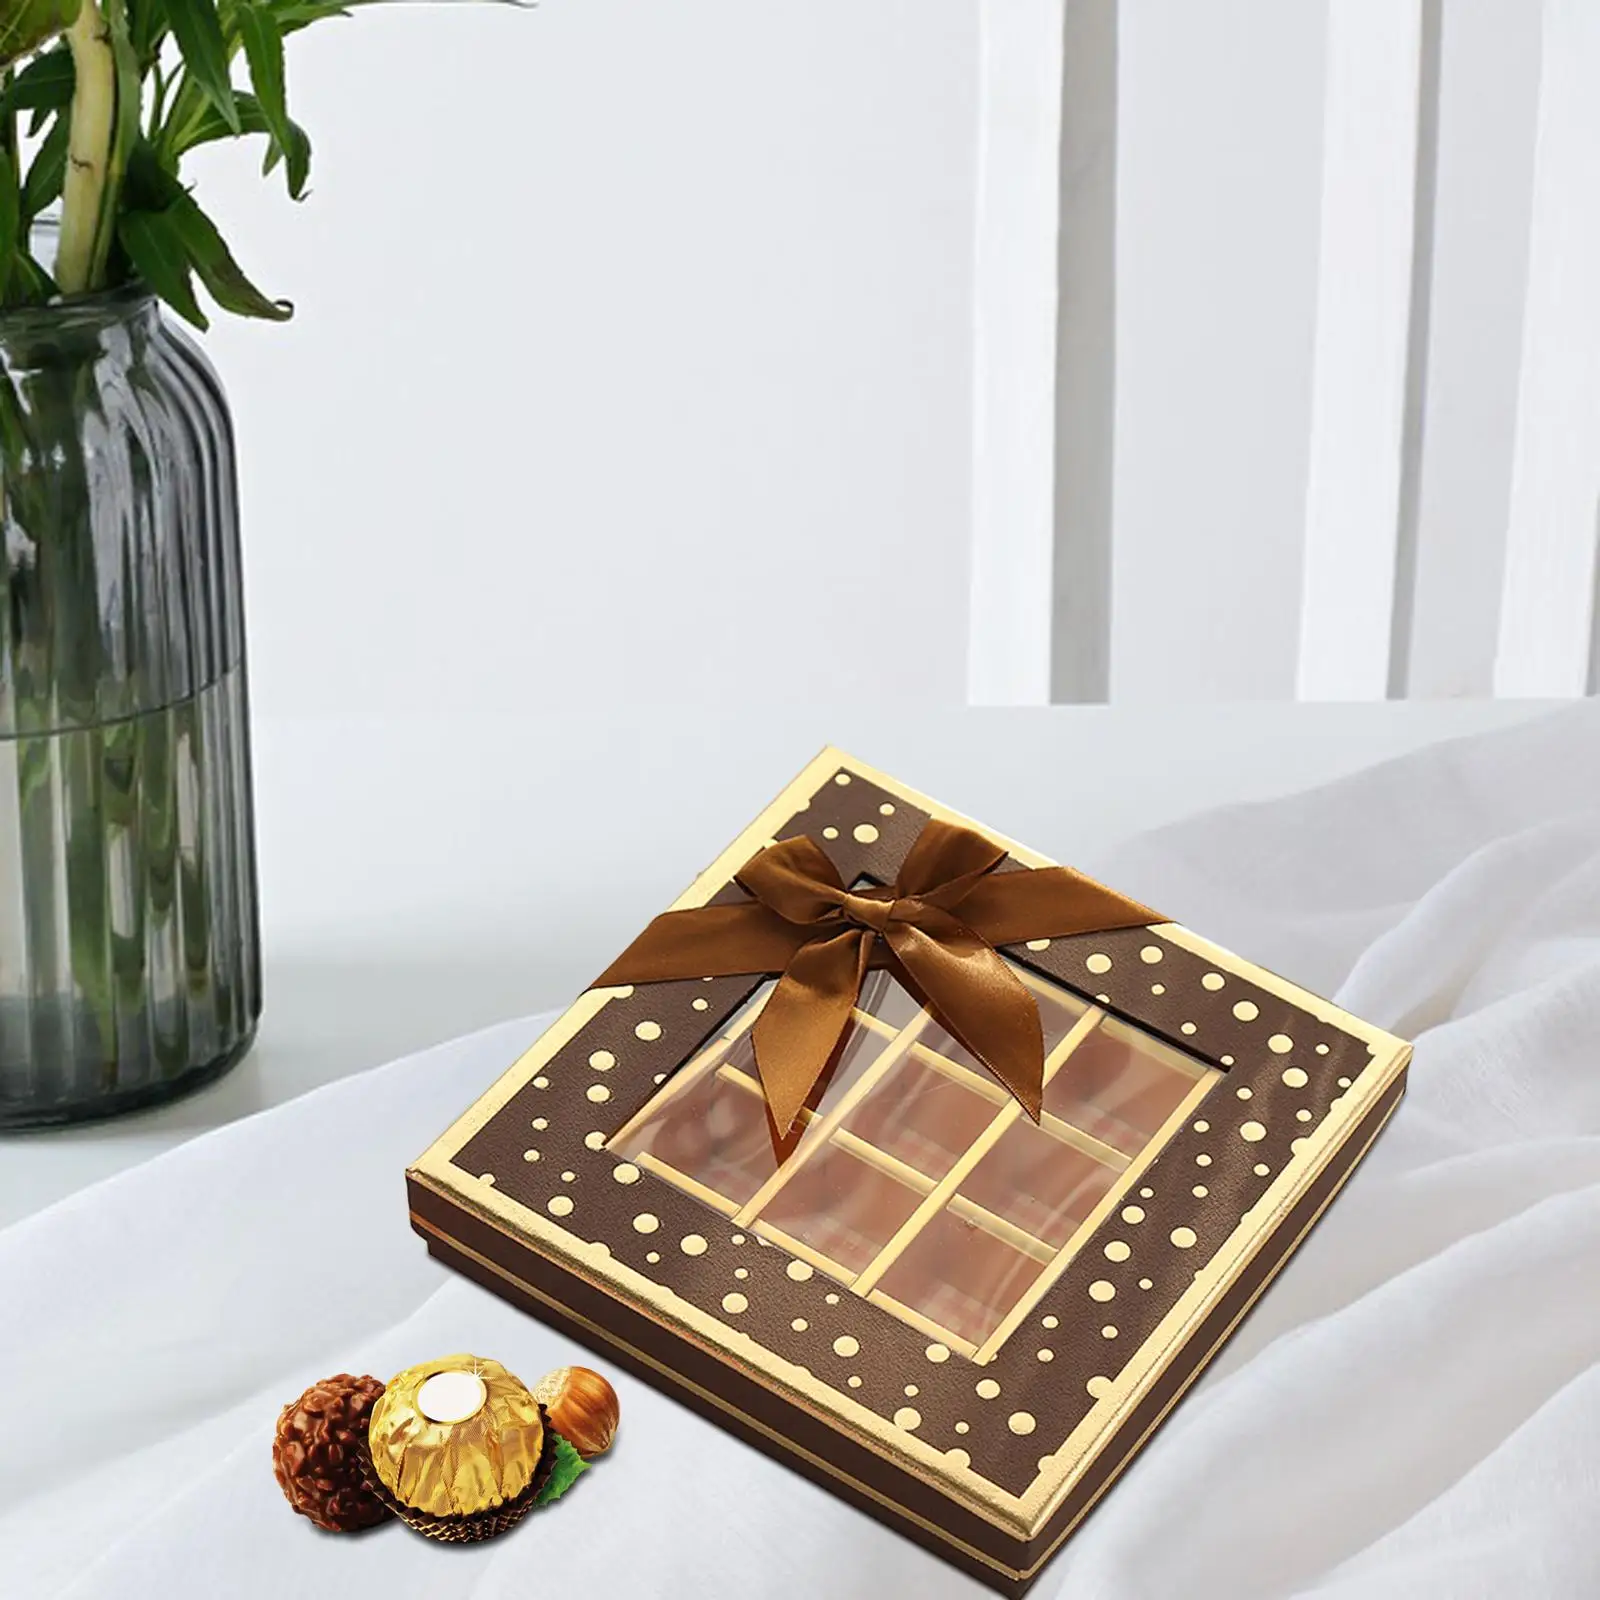 Chocolate Box 25 Inner Grids Valentines Day Gift Box for Party Favor Anniversary Family Members Girlfriend Boyfriend Holidays